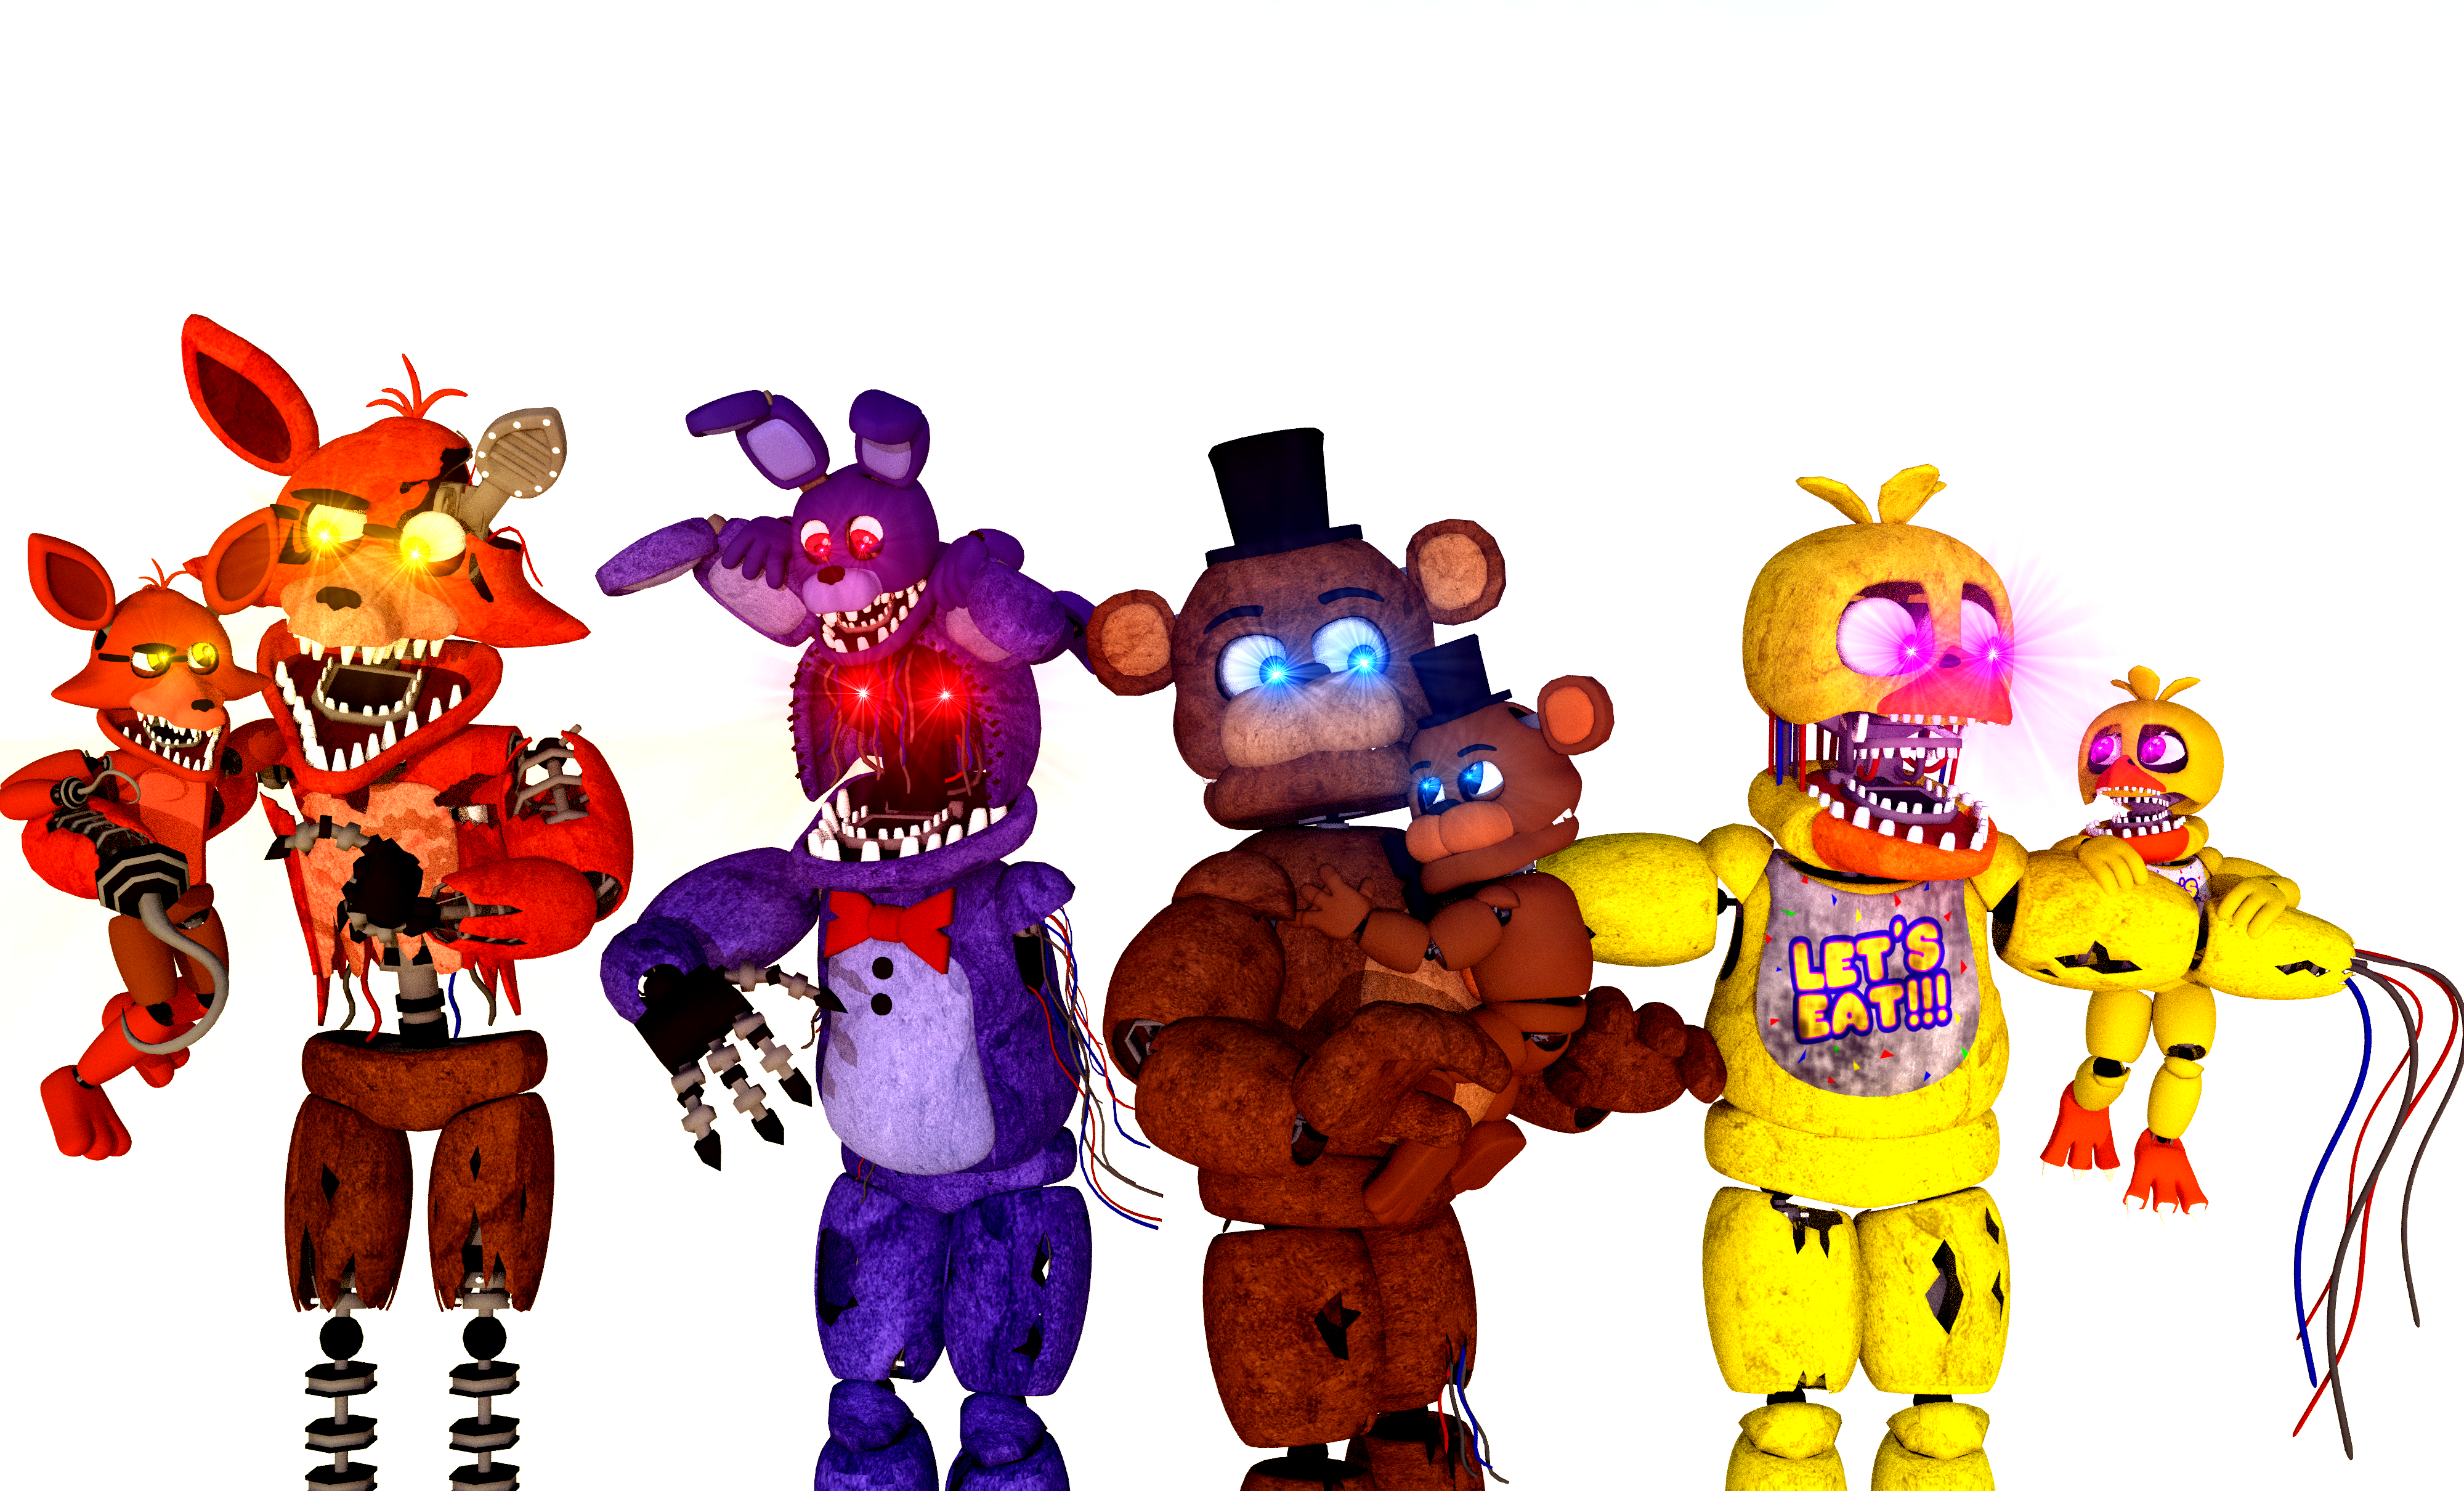 Withered FNAF АНИМАТРОНИКИ. Toy АНИМАТРОНИКИ. Маленькие АНИМАТРОНИКИ игрушки. Добрые игрушки АНИМАТРОНИКОВ.